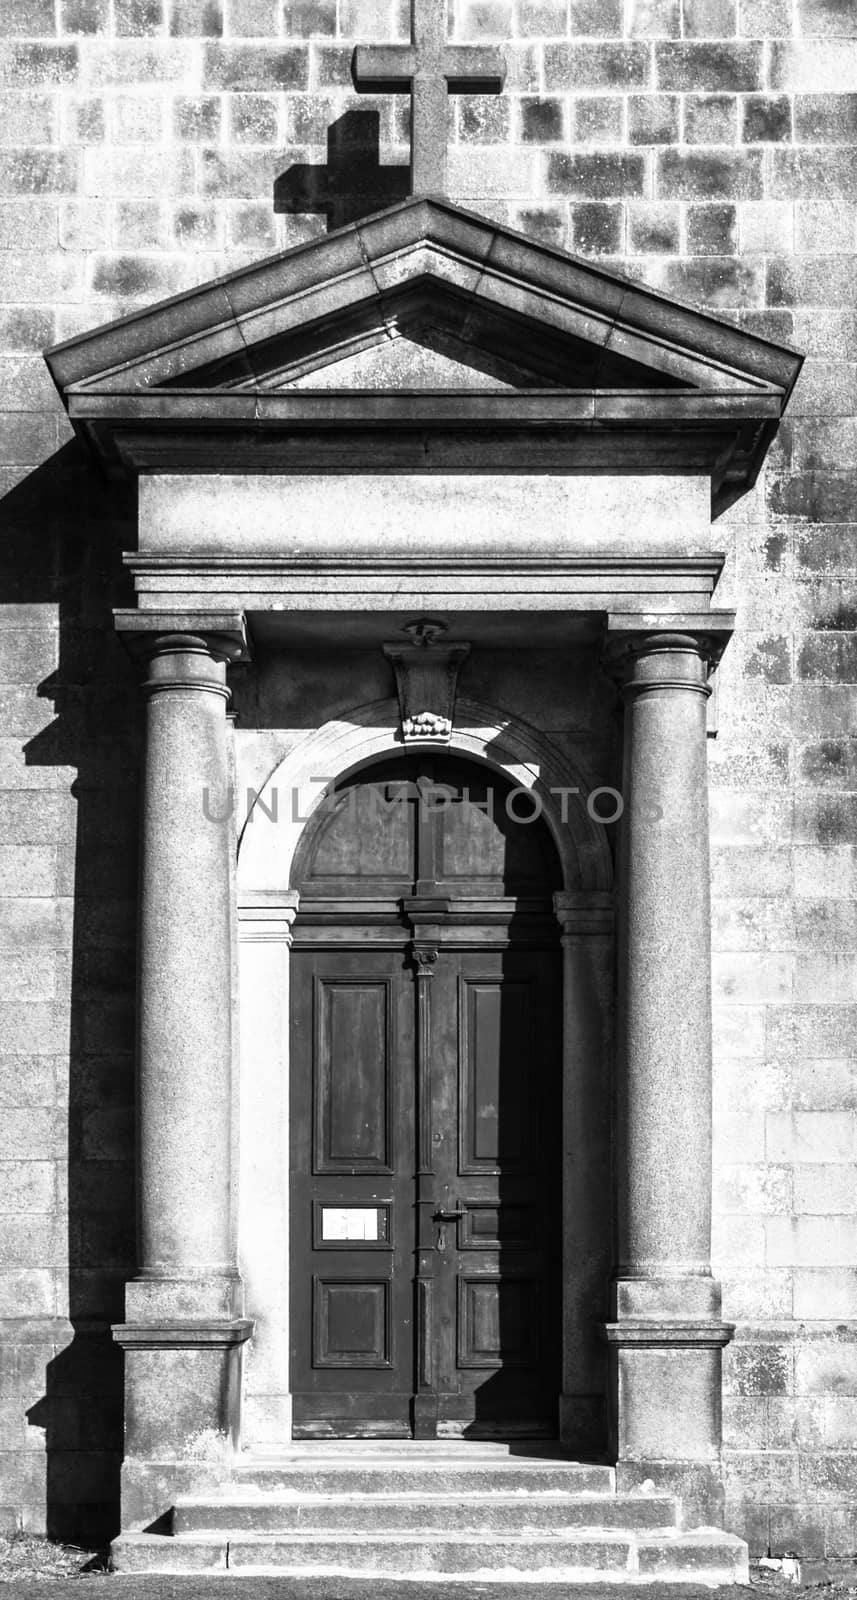 Old wooden church door. Entrance to the St Peter and Paul Church in Tanvald, Czech Republic by pyty